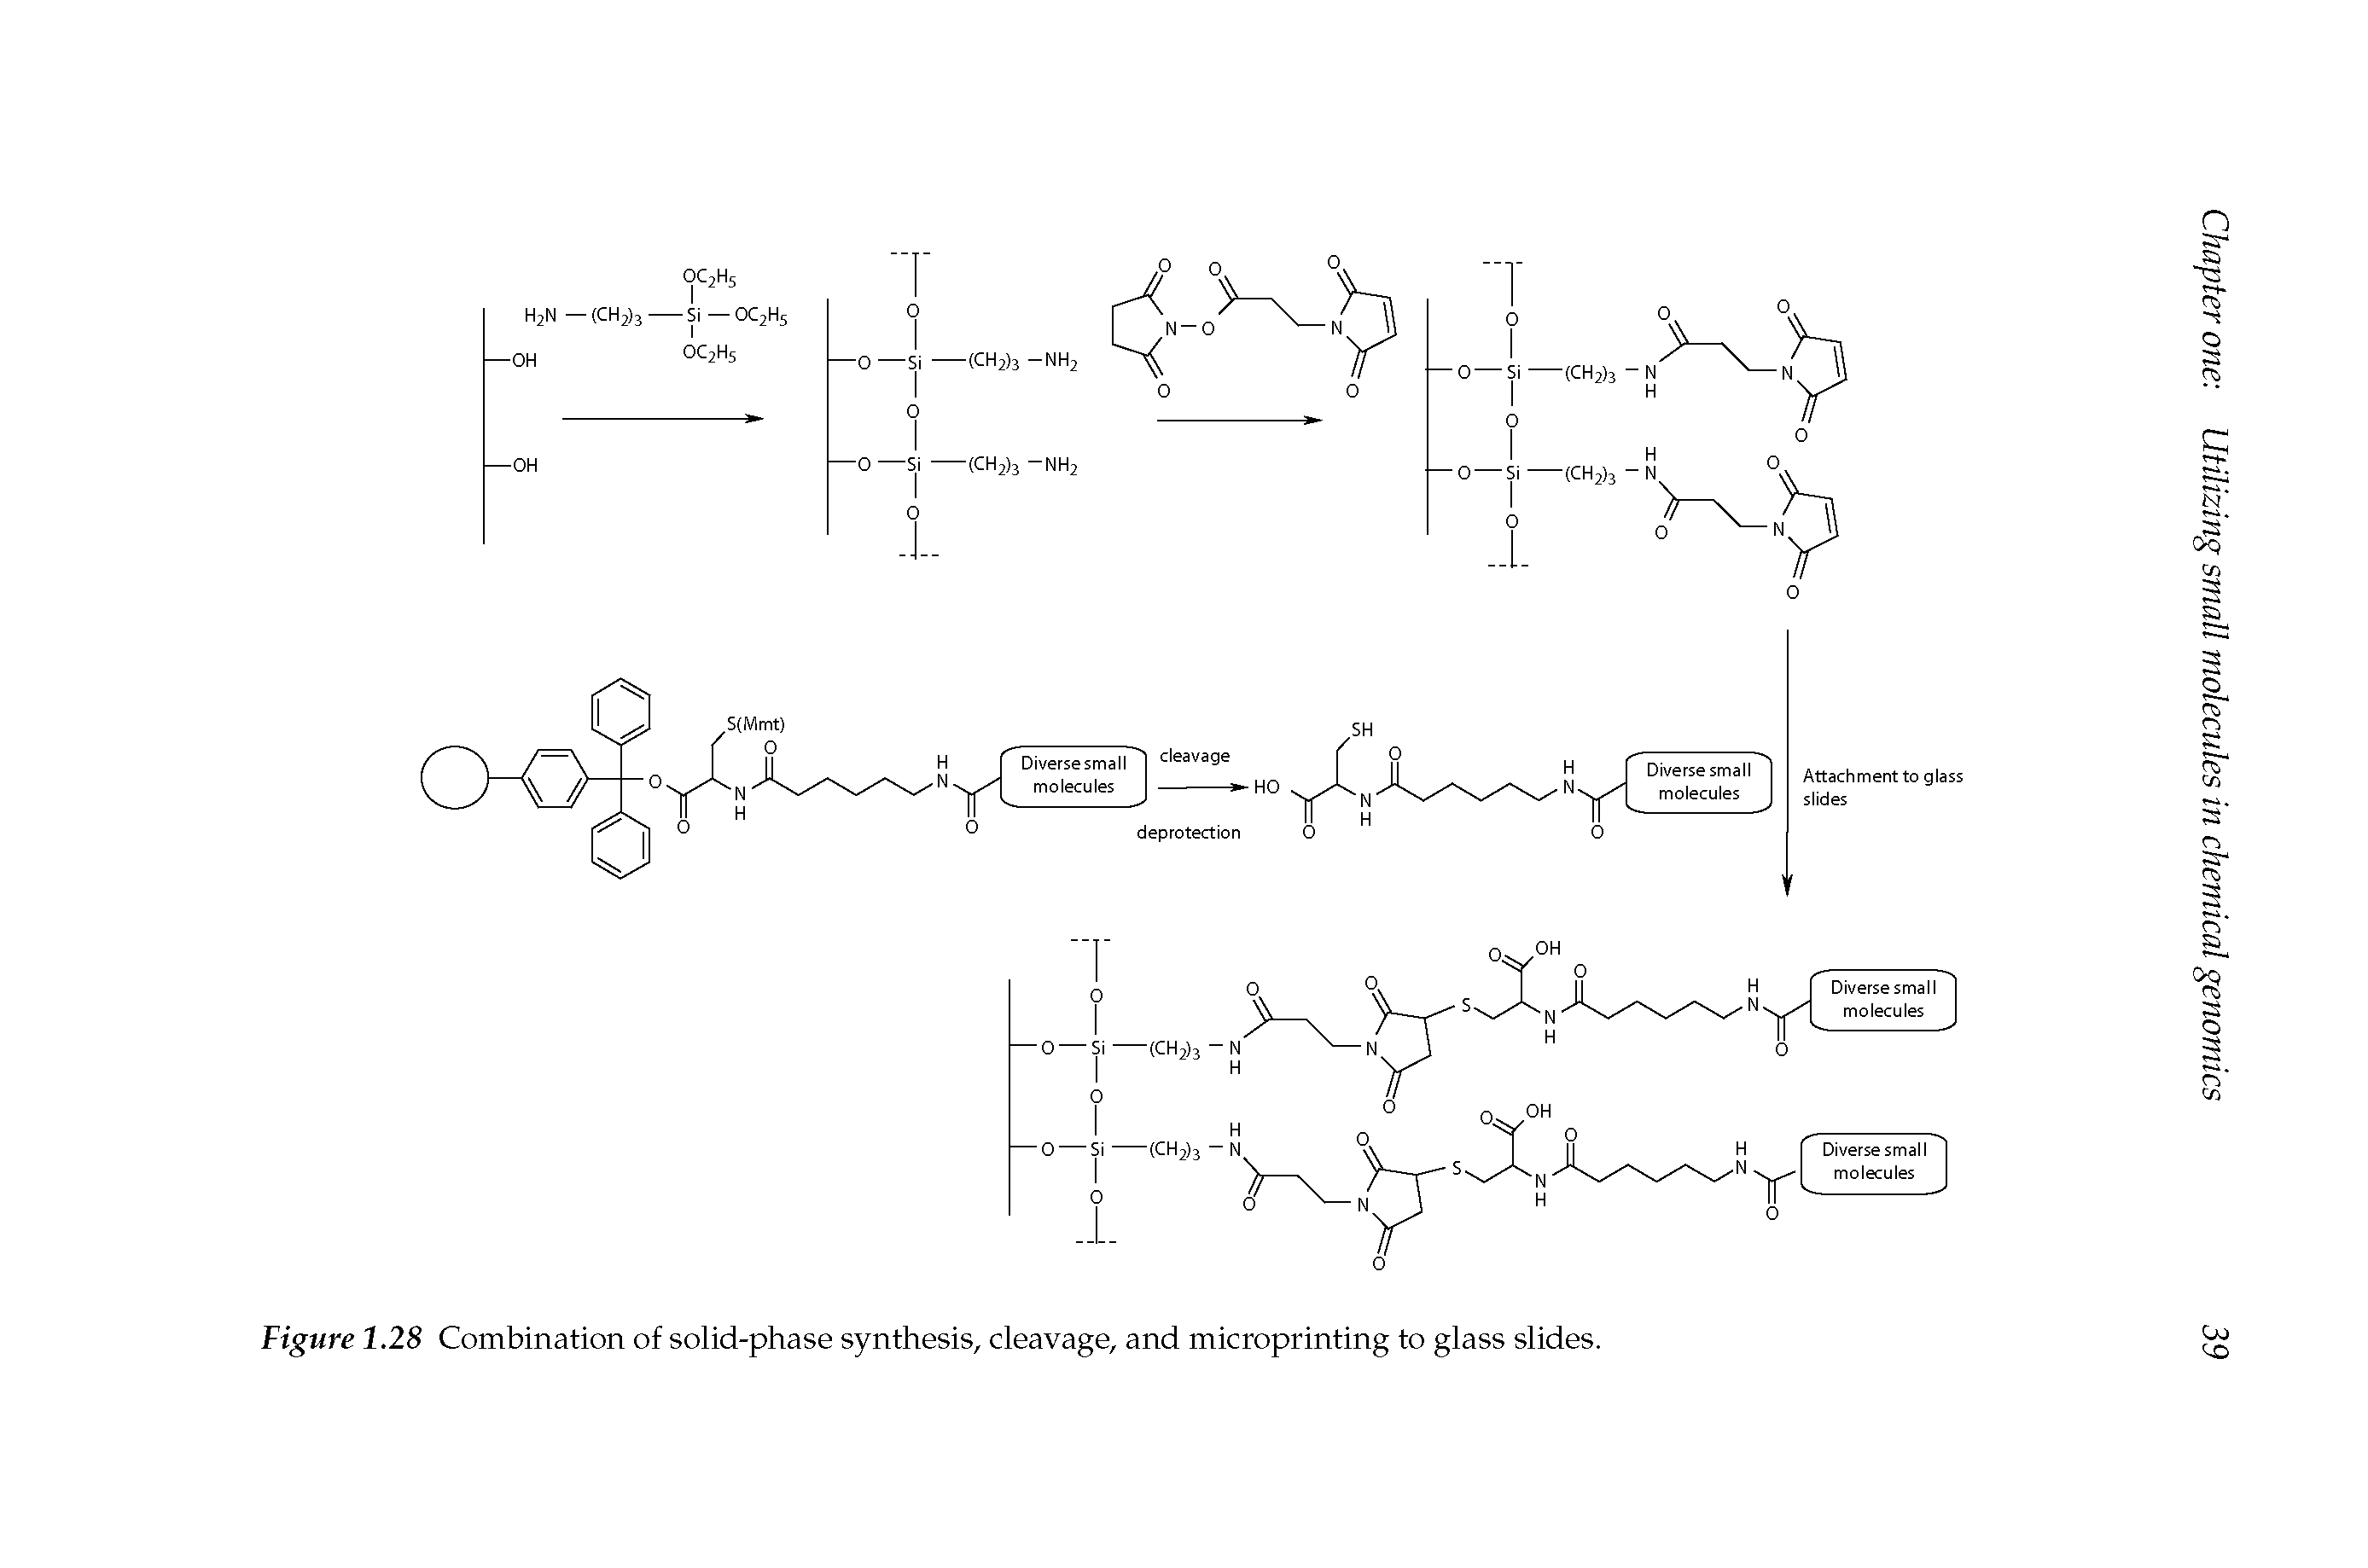 Figure 1.28 Combination of solid-phase synthesis, cleavage, and microprinting to glass slides.